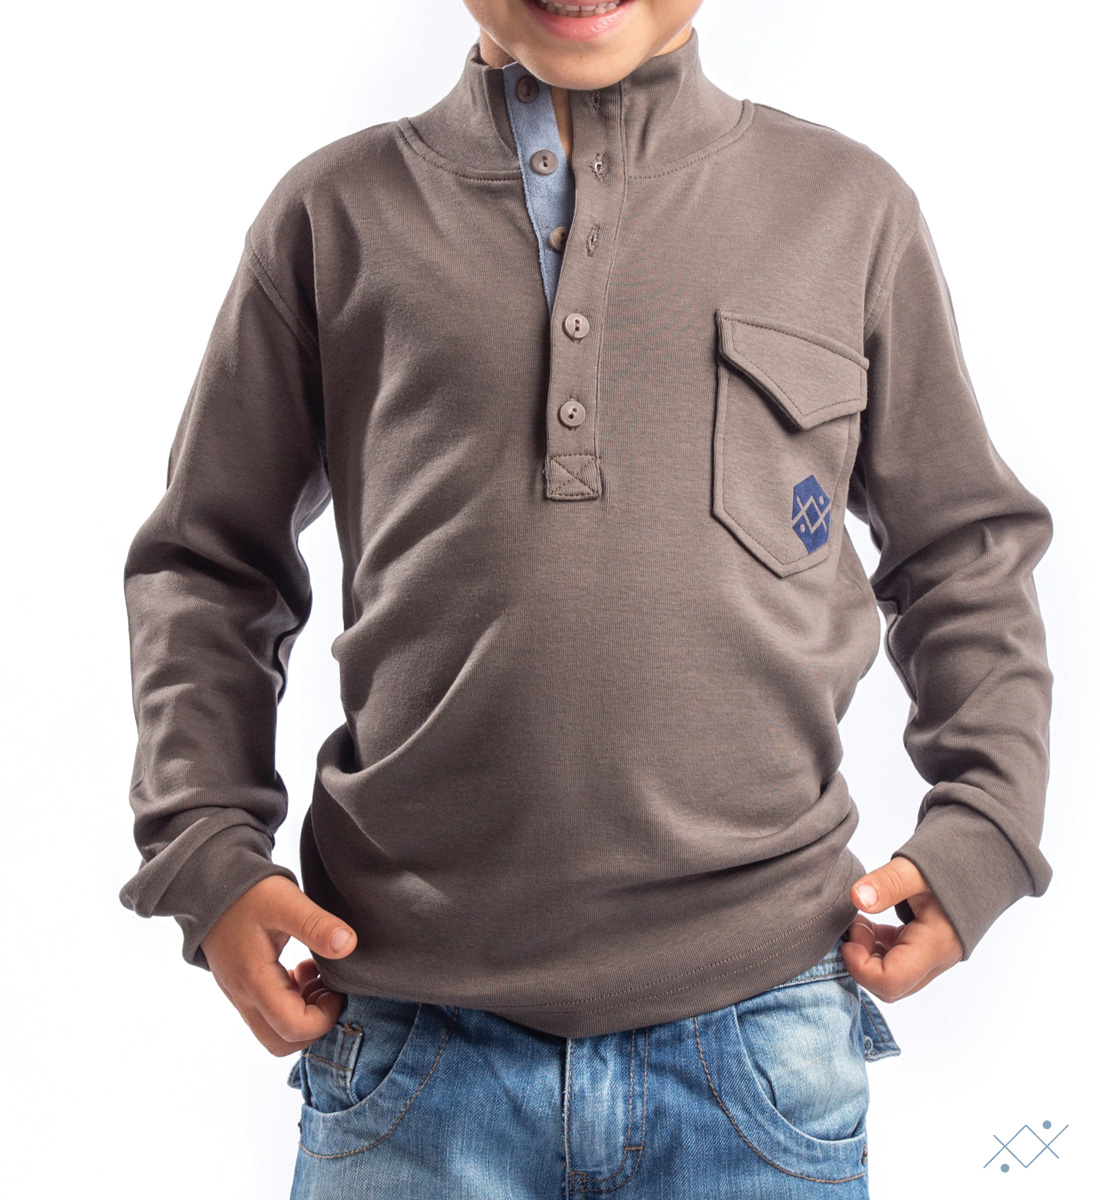 Kid´s long sleeve with 5 buttons and placket in light blue velvet - pocket